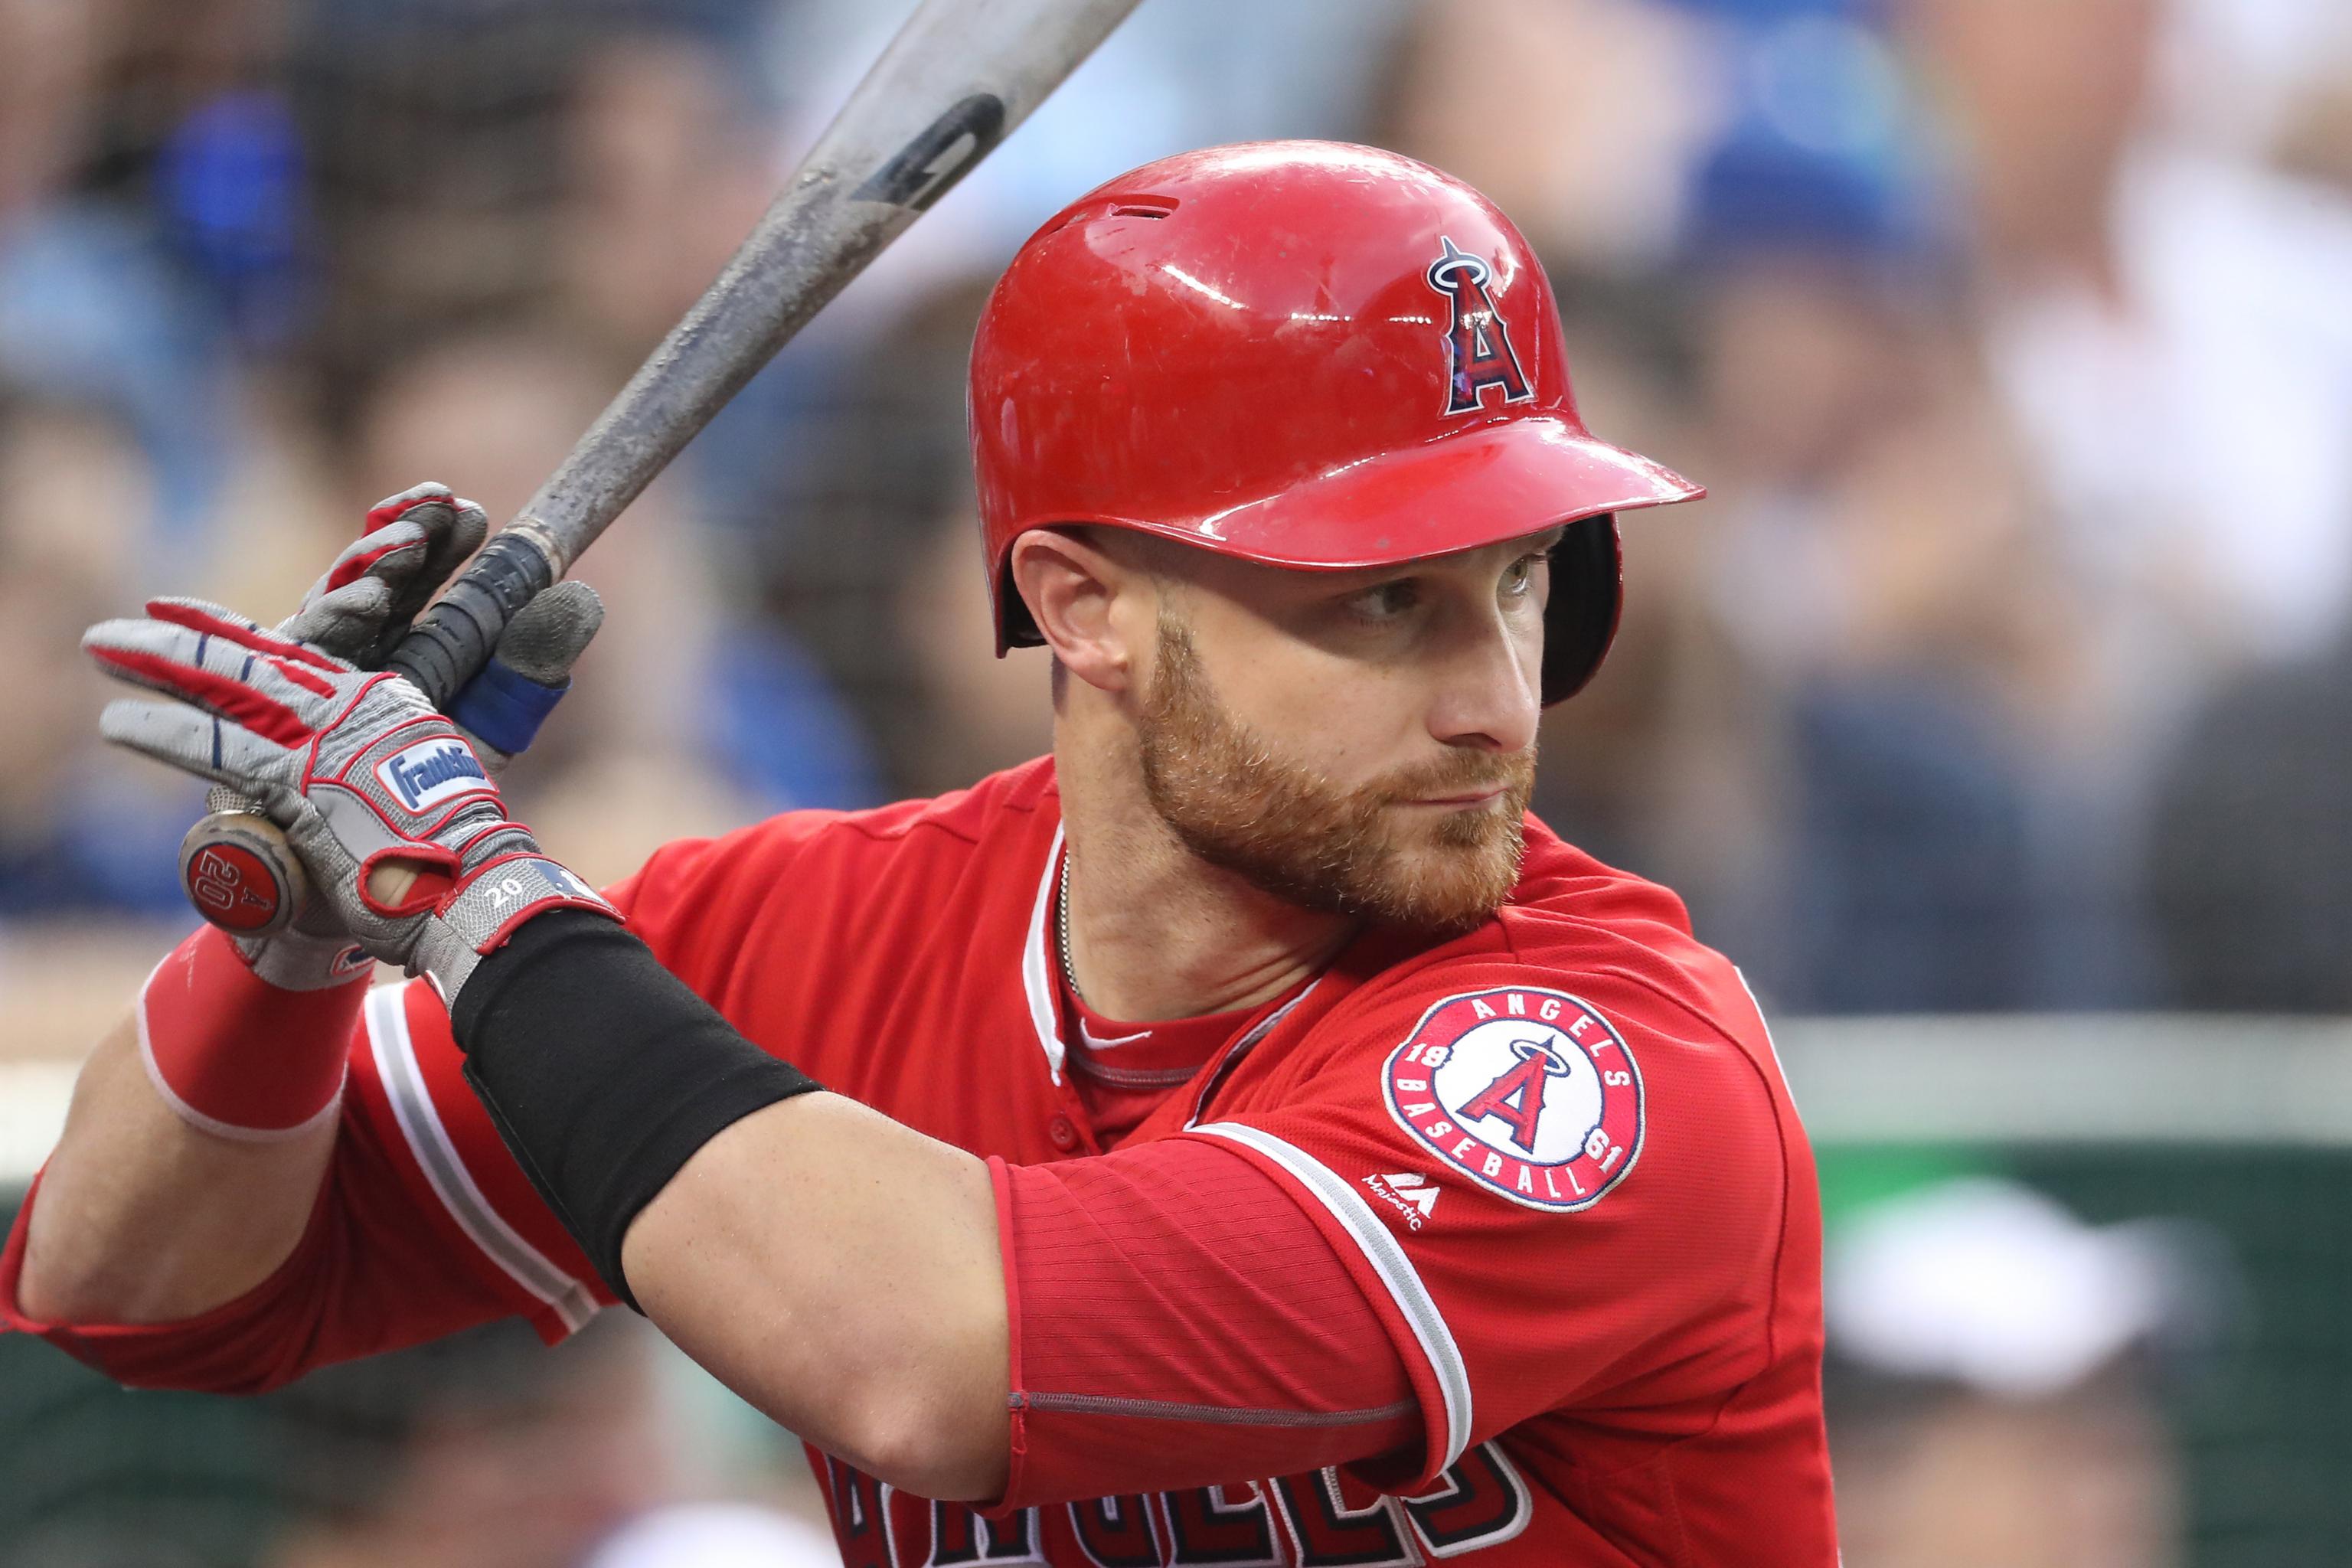 REPORT: Cubs Have Interest in Free Agent Catchers Jonathan Lucroy